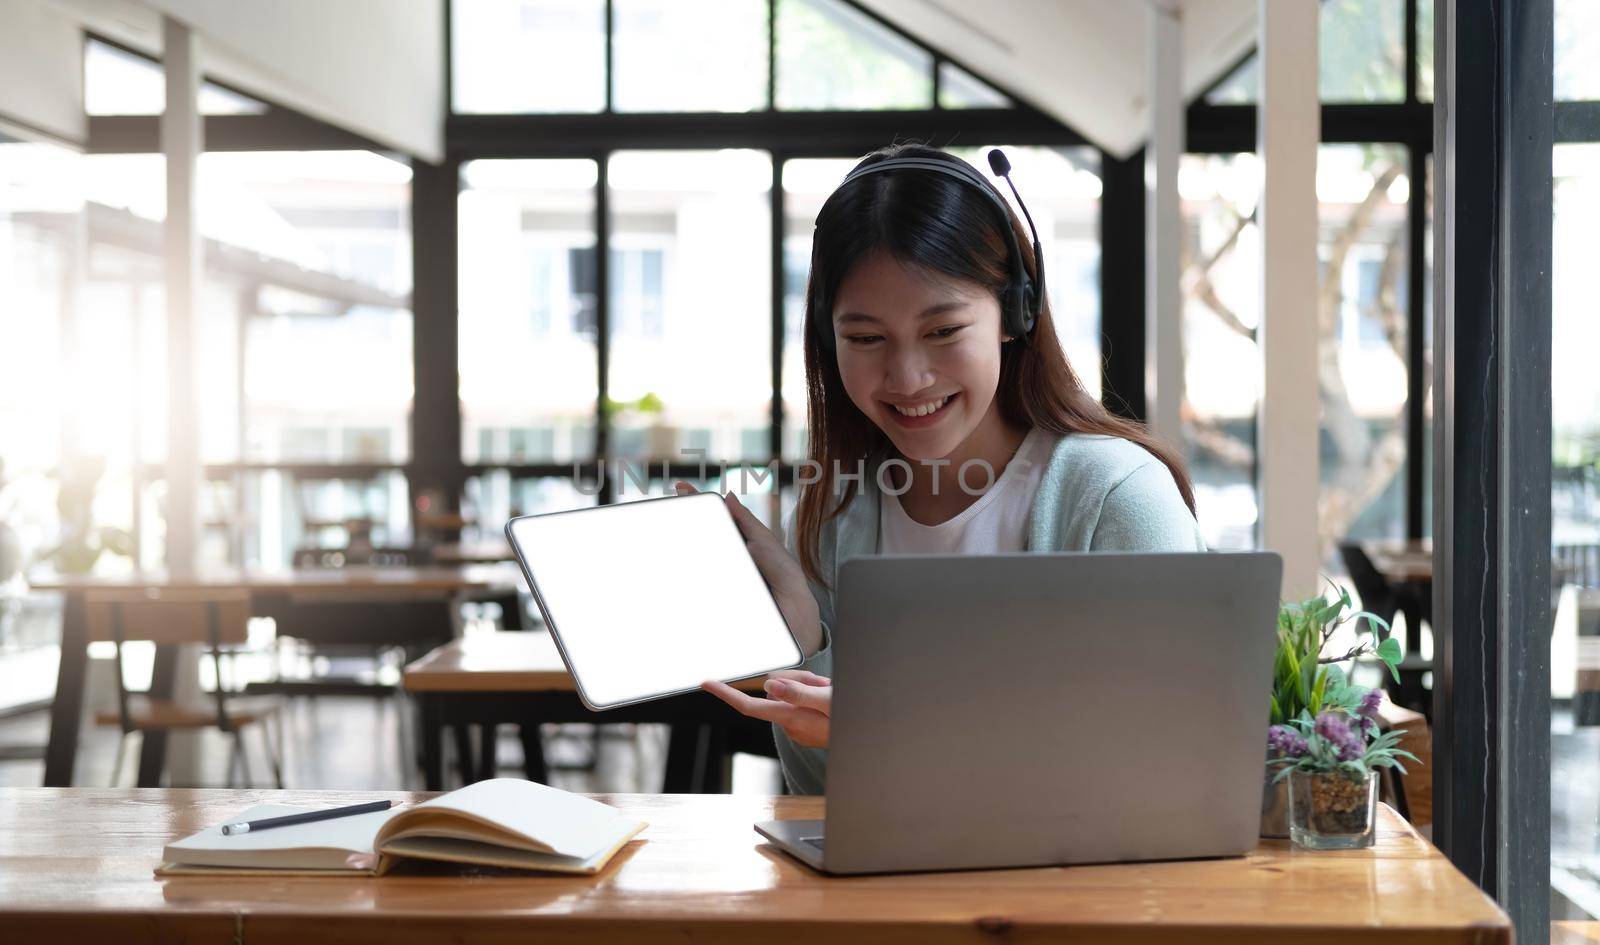 Happy young woman in headphones speaking looking at laptop making notes, girl student talking by video conference call, female teacher trainer tutoring by webcam, online training, e-coaching concept.